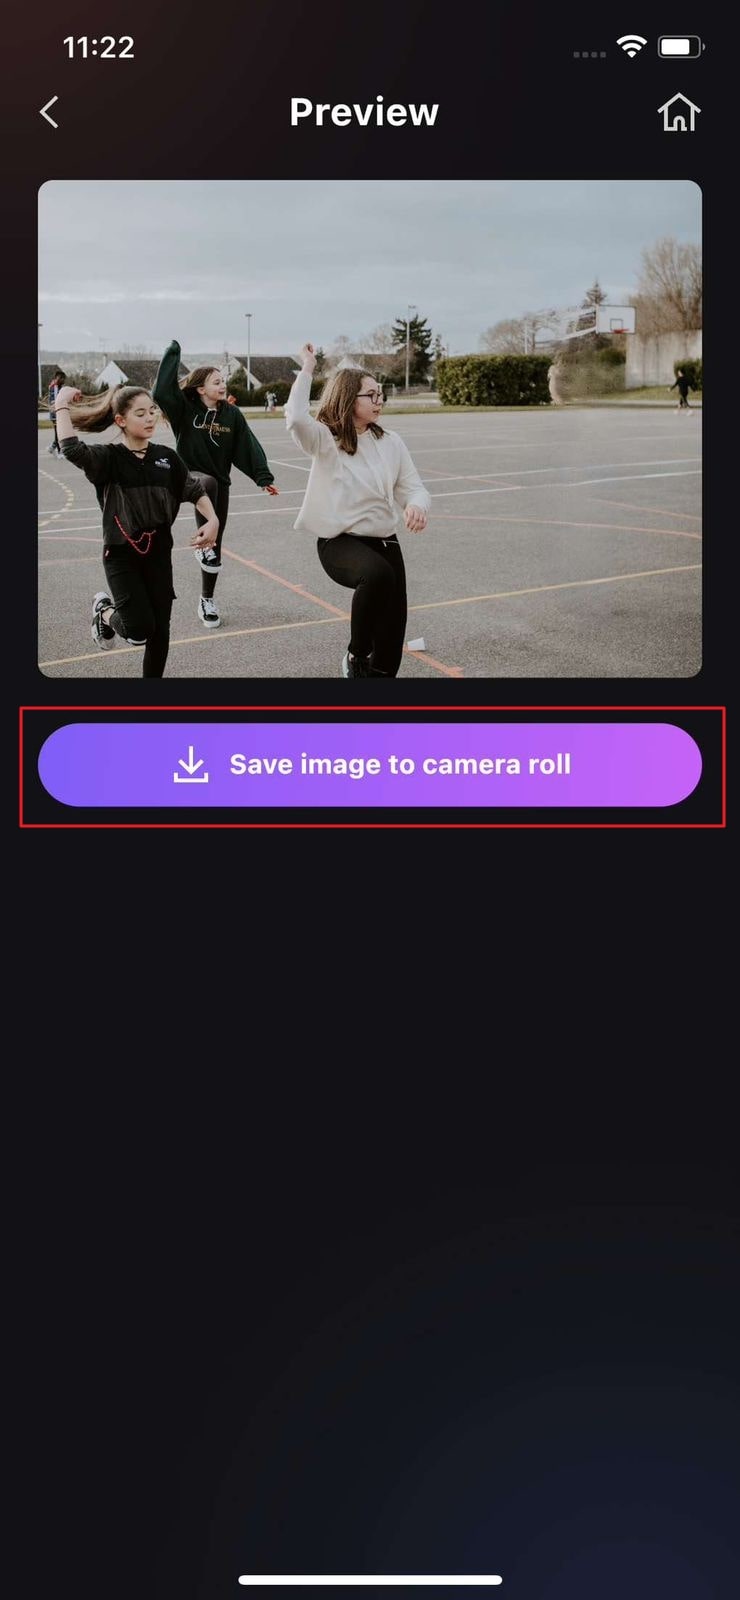 tap save image to camera roll